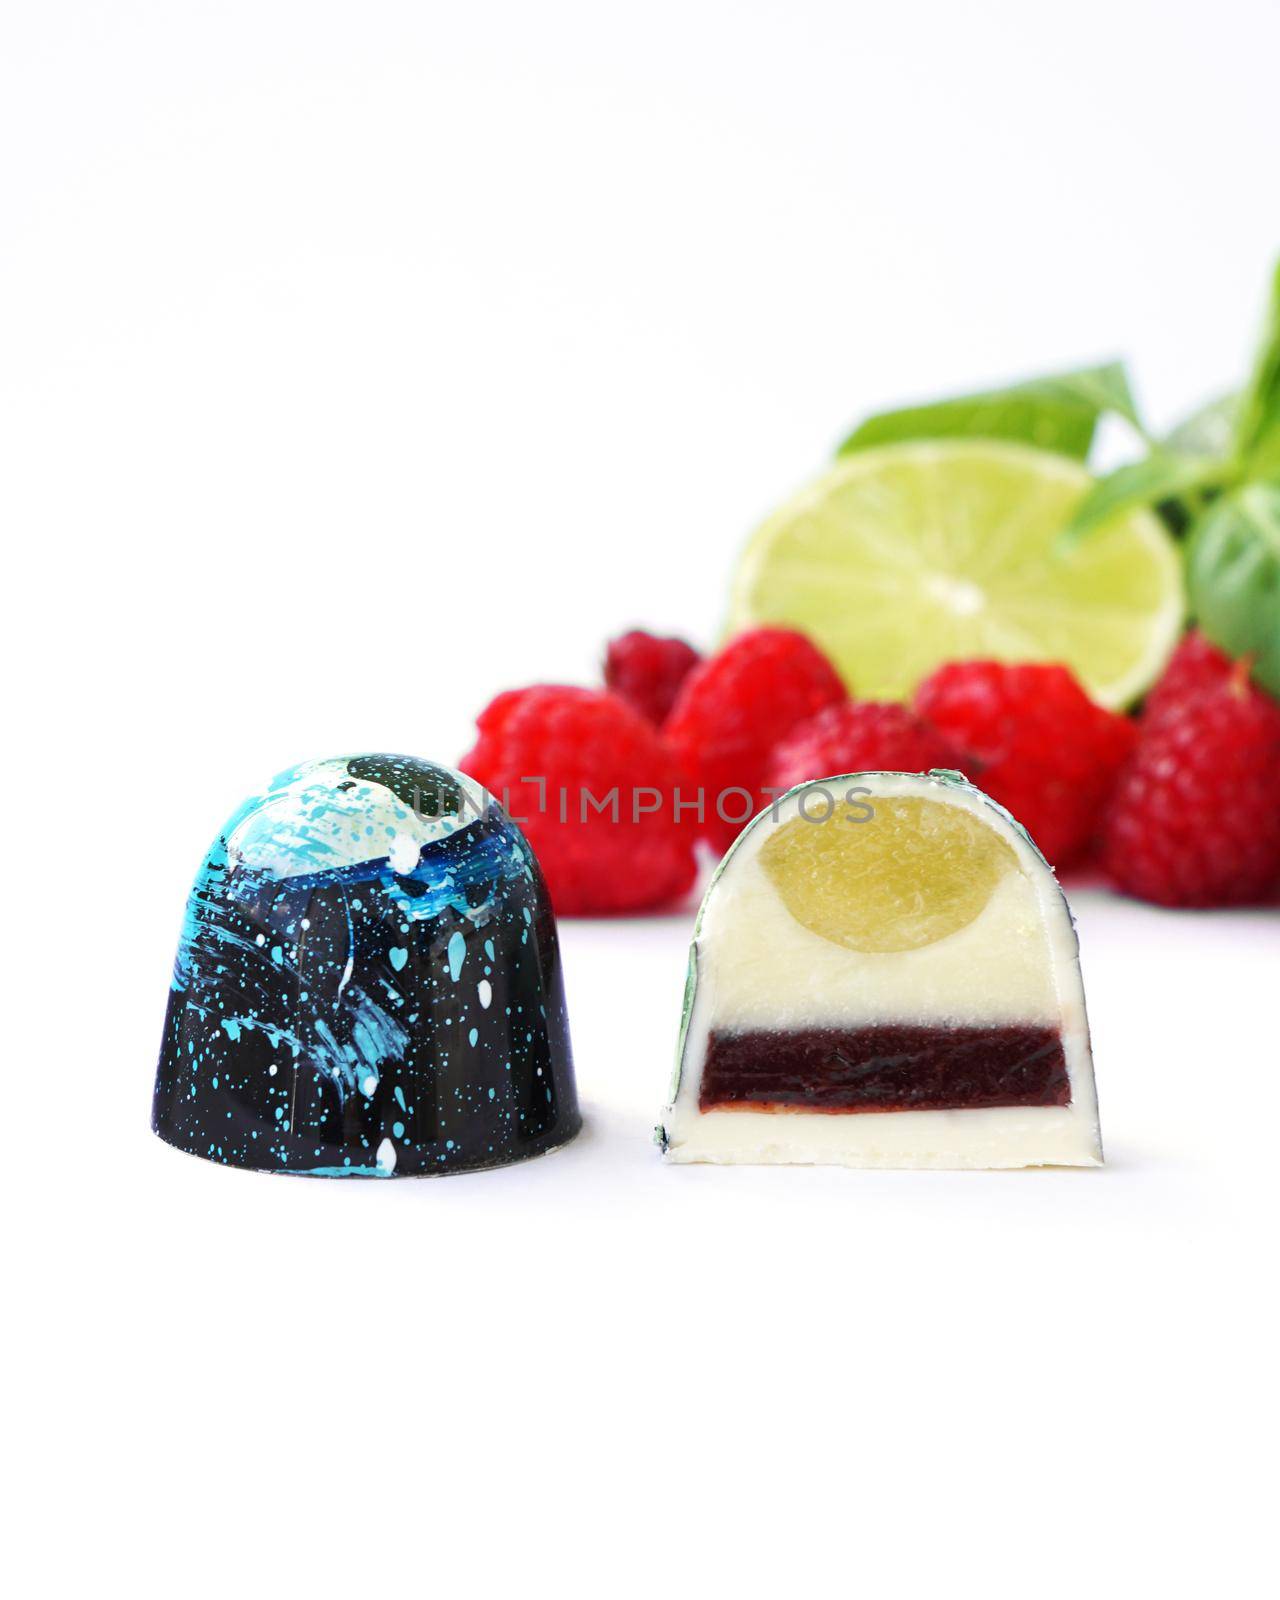 Cutaway chocolate candy. Raspberry, lime and basil on a white background. Handmade sweets.